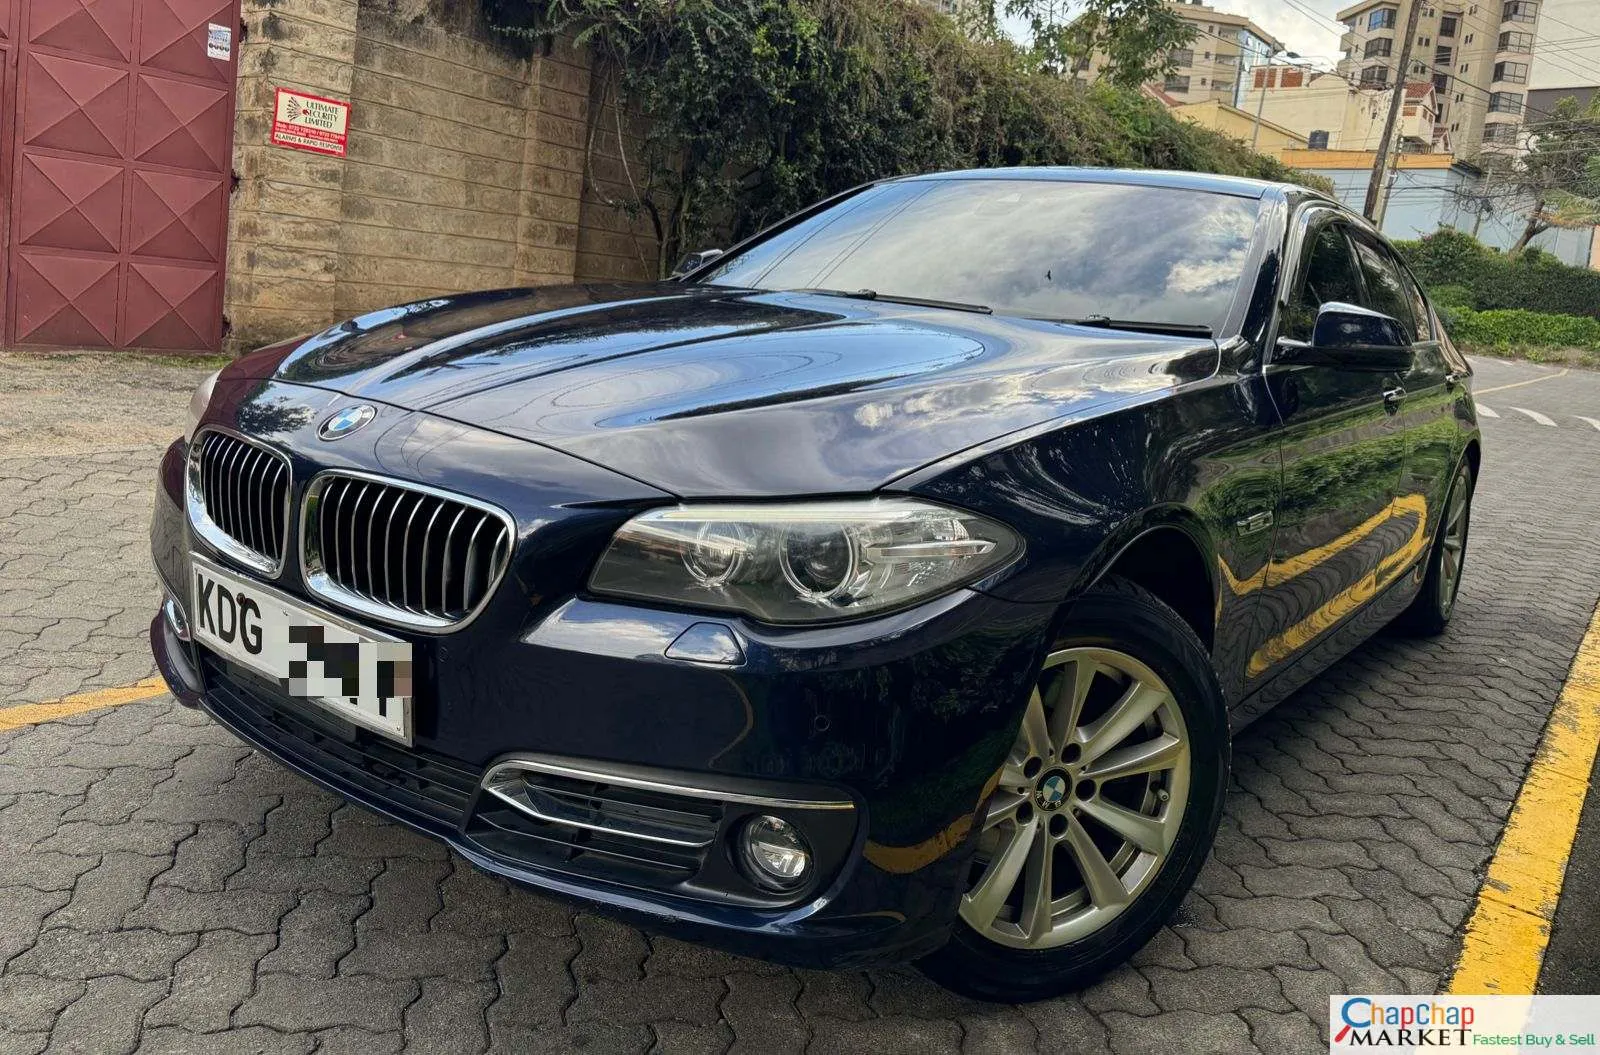 Bmw 523i You Pay 30% deposit hire purchase INSTALLMENTS Trade in Ok 5 series